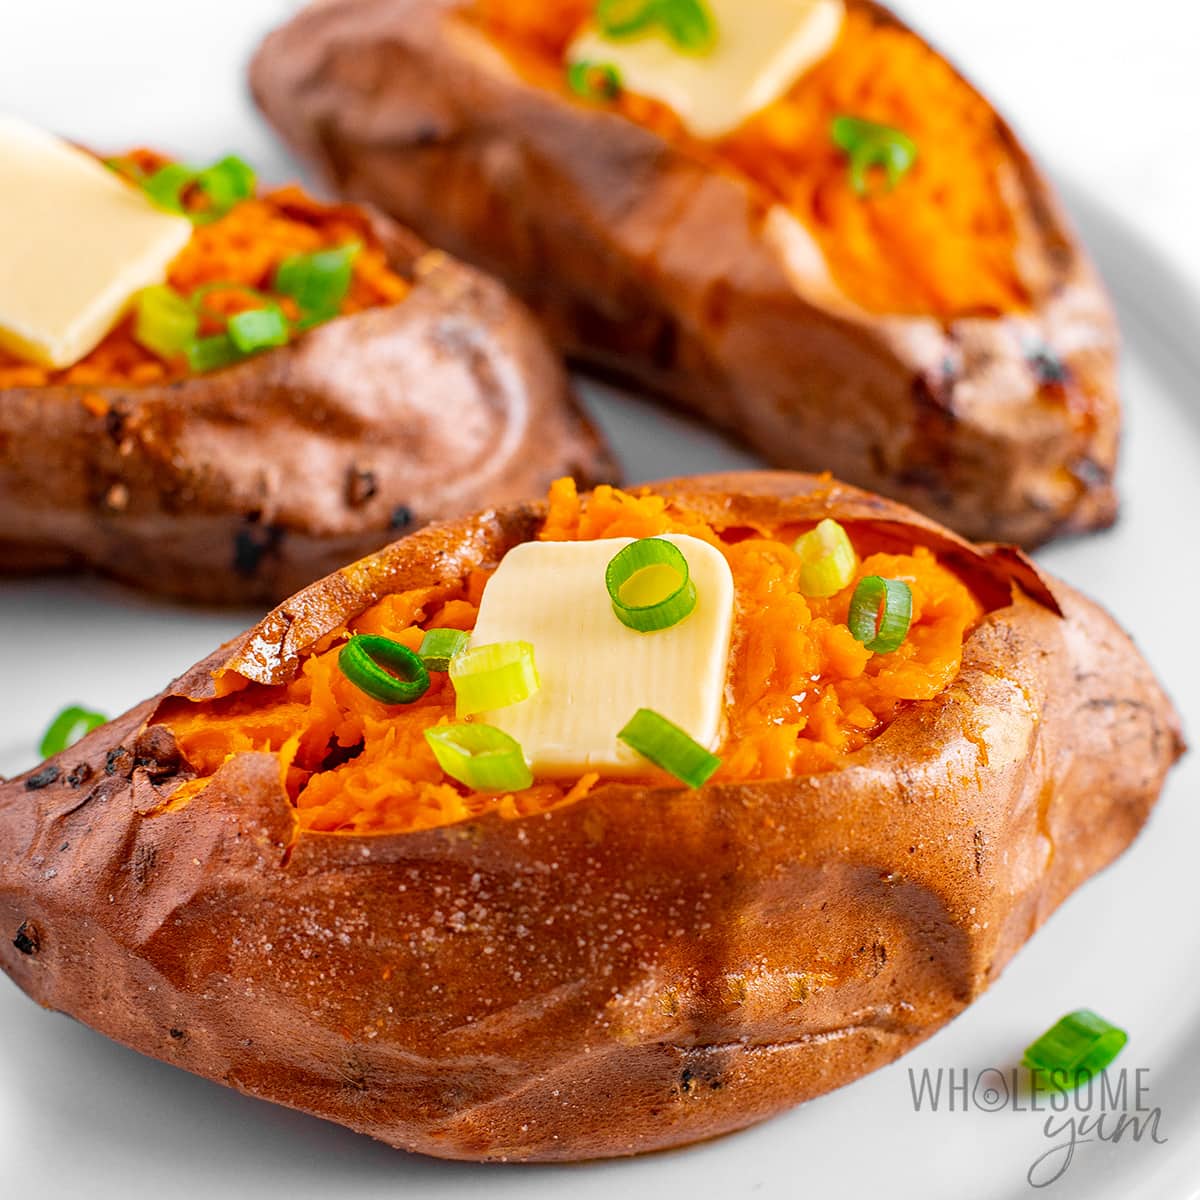 Baked sweet potato with a few more in background.